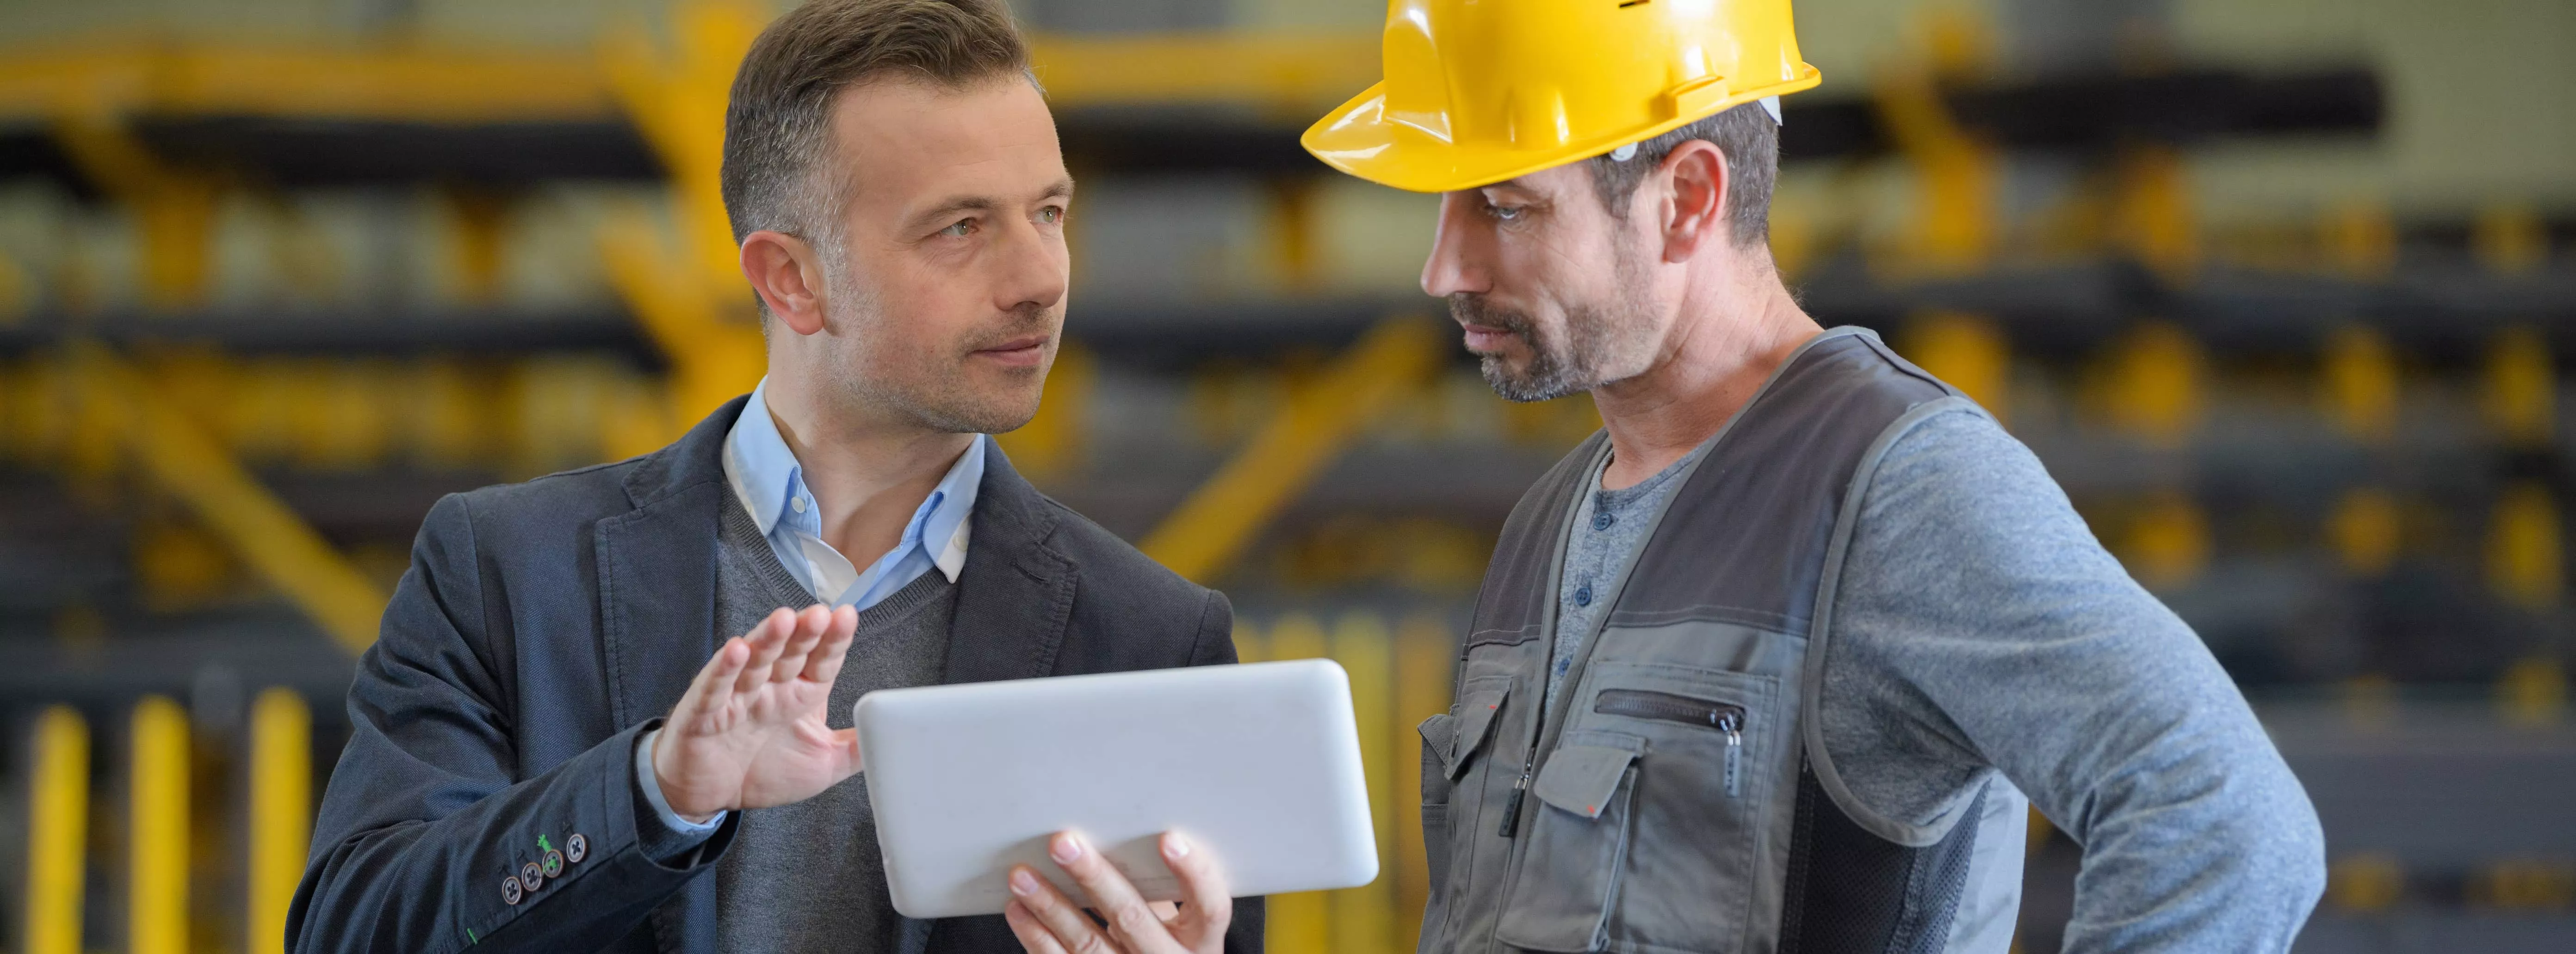 two men at construction site discussing something on a tablet 